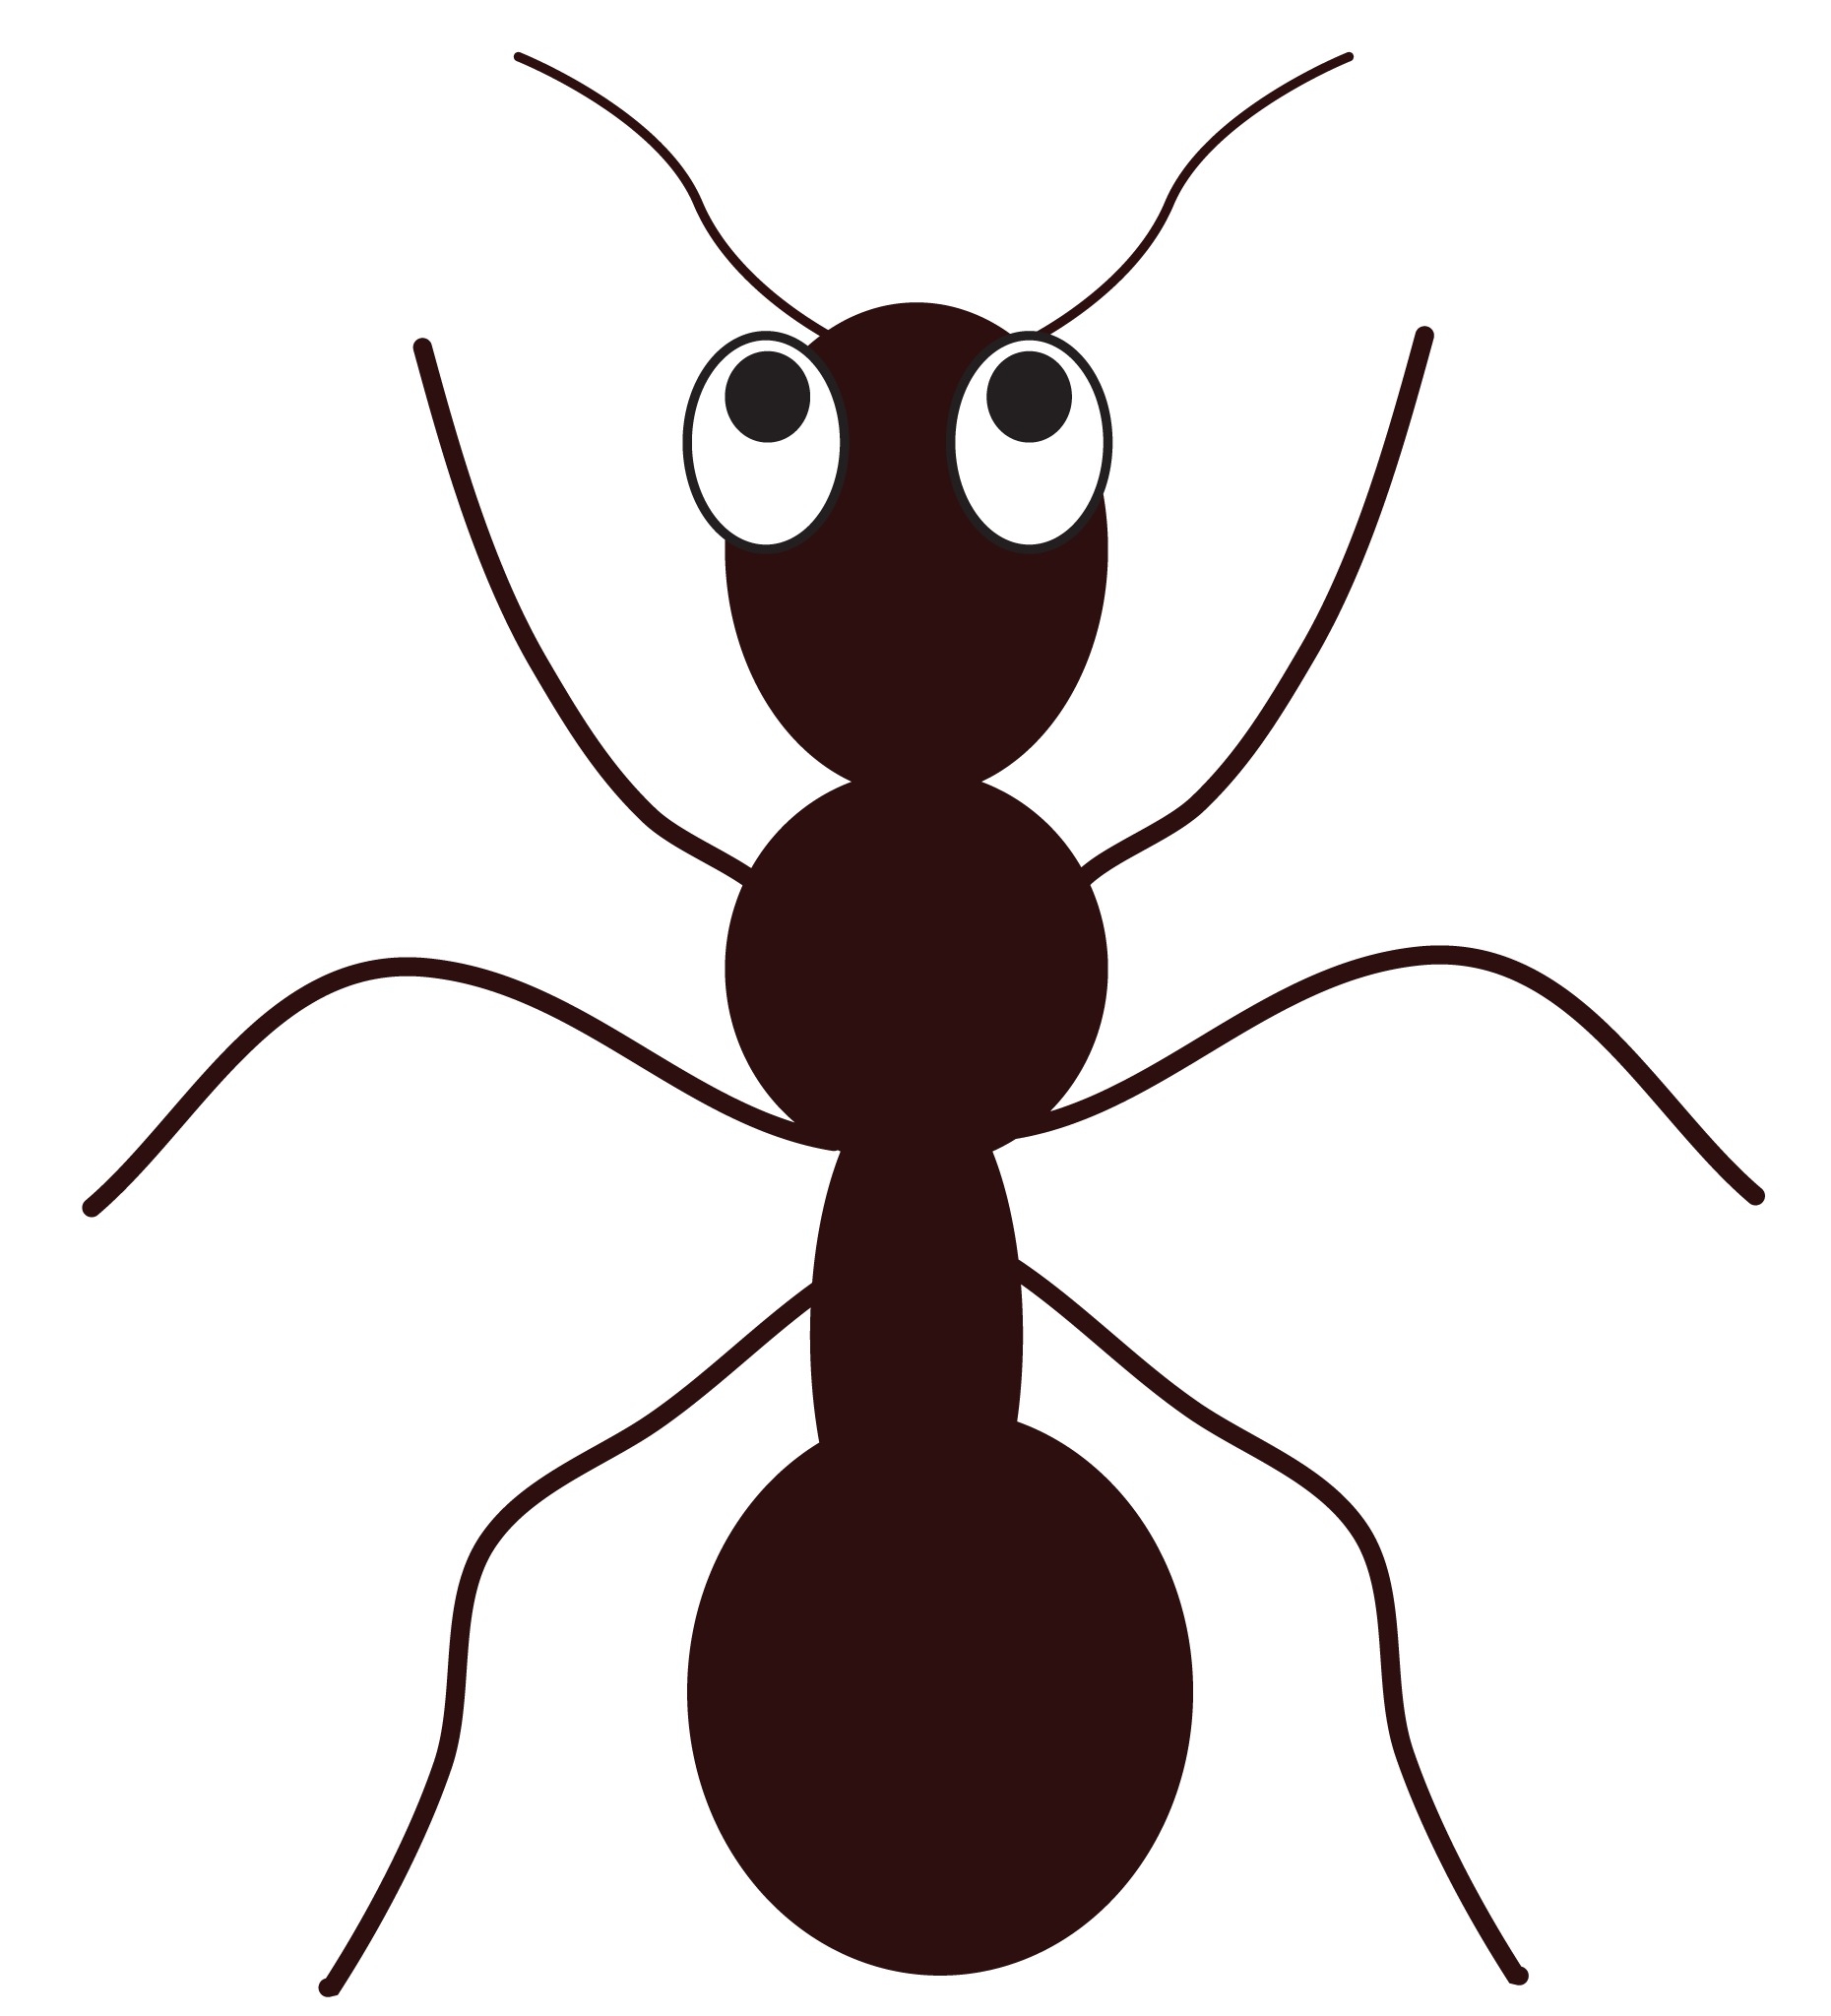 Ant letters free images. Ants clipart border